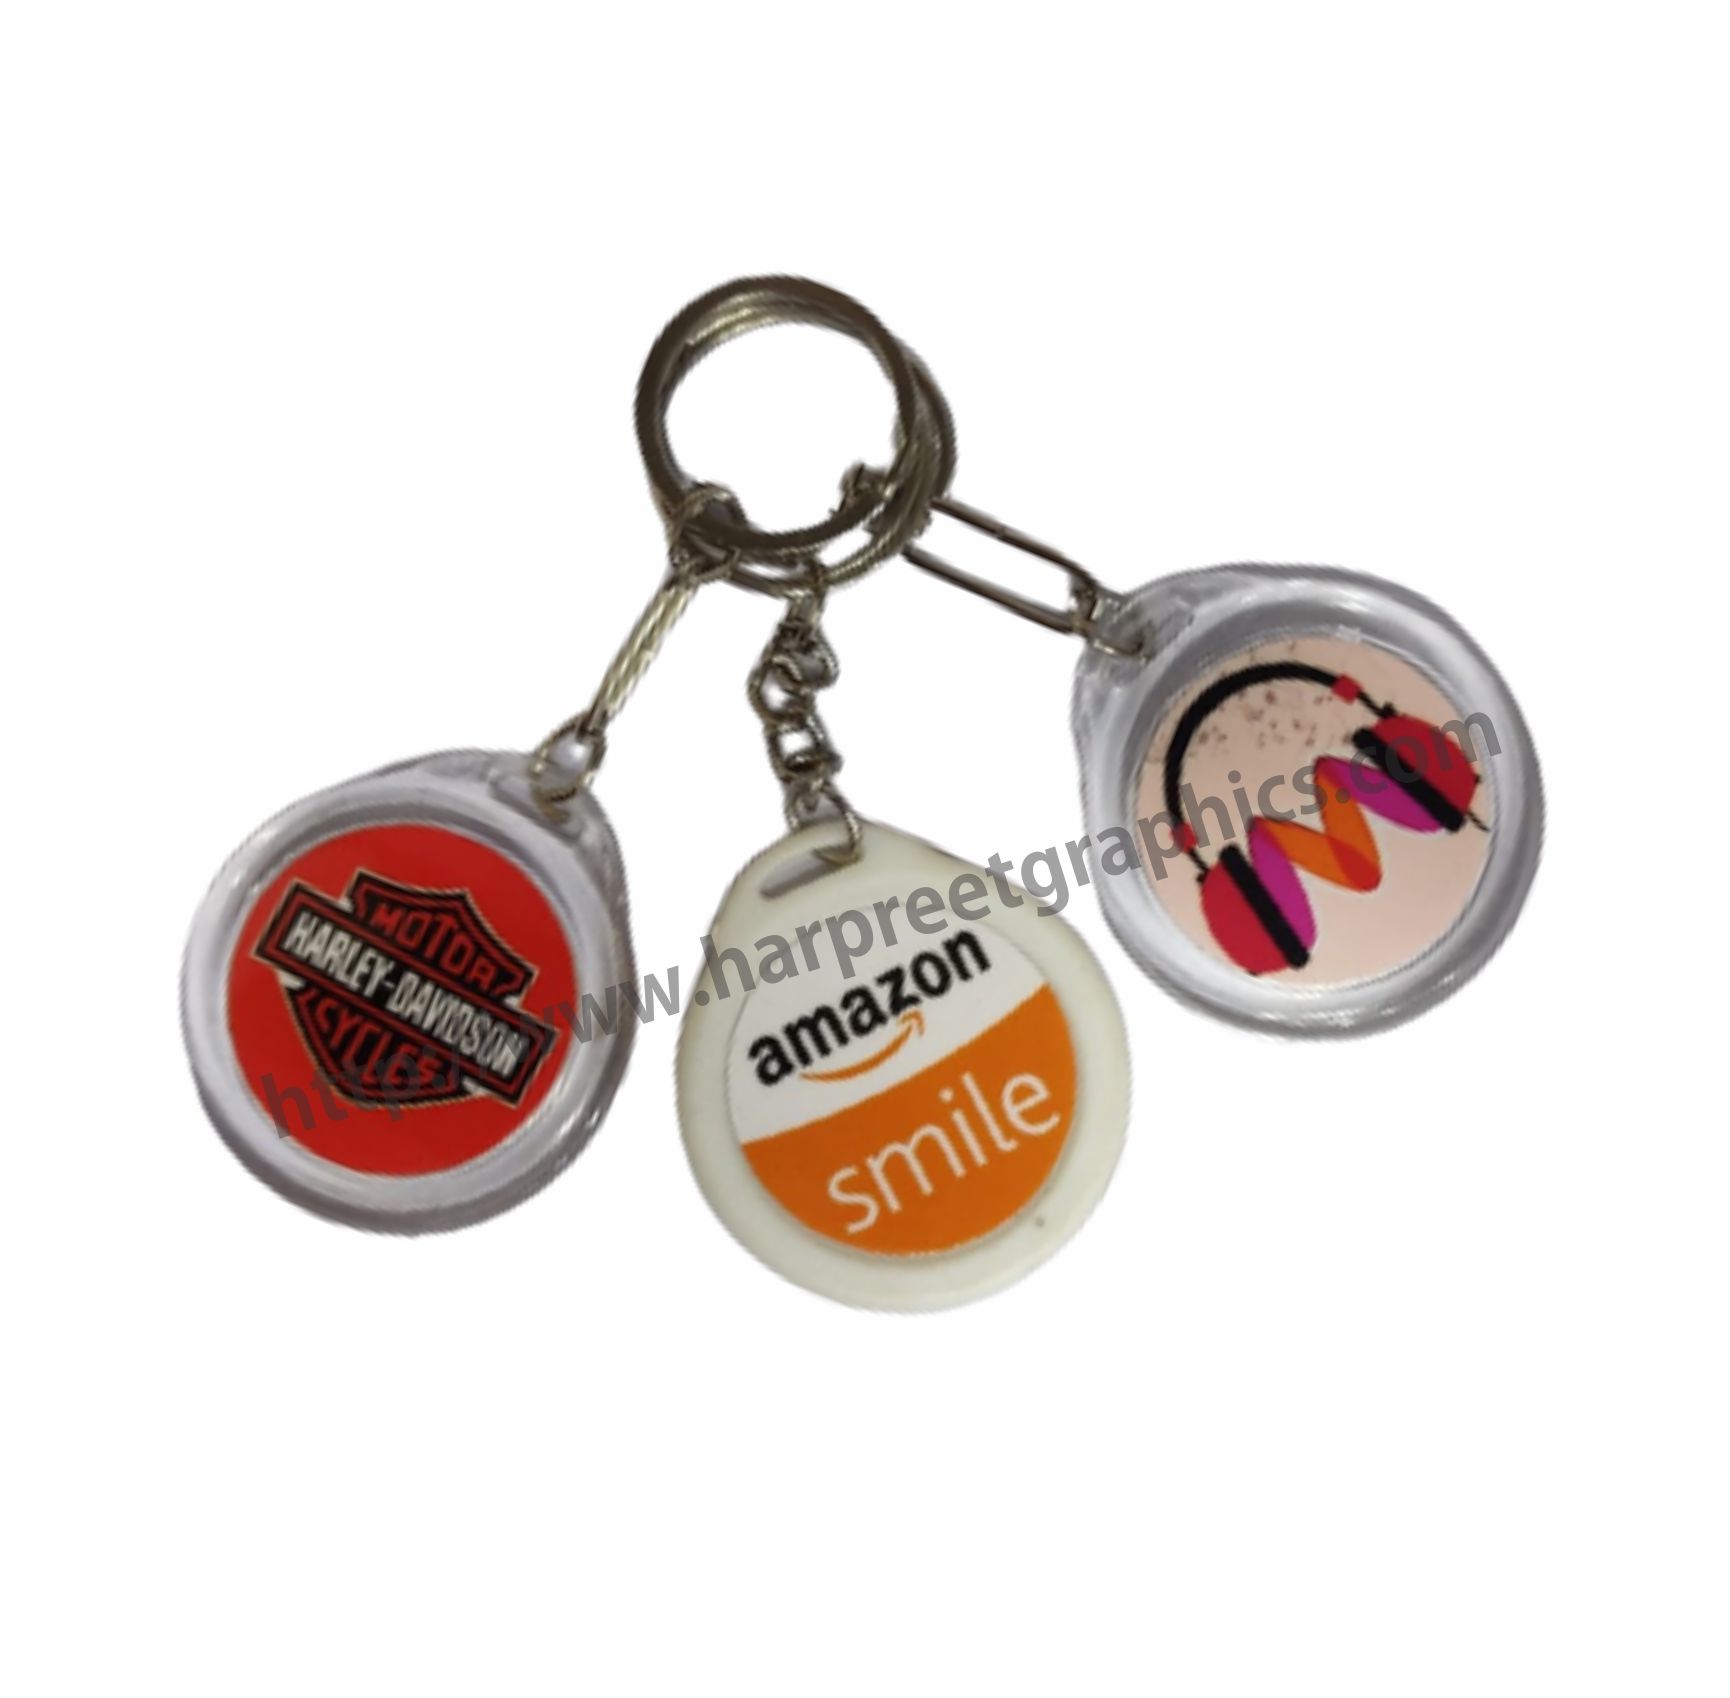 ROUND DOUBLE SIDE KEYCHAIN@@LUGGAGE TAG (25)